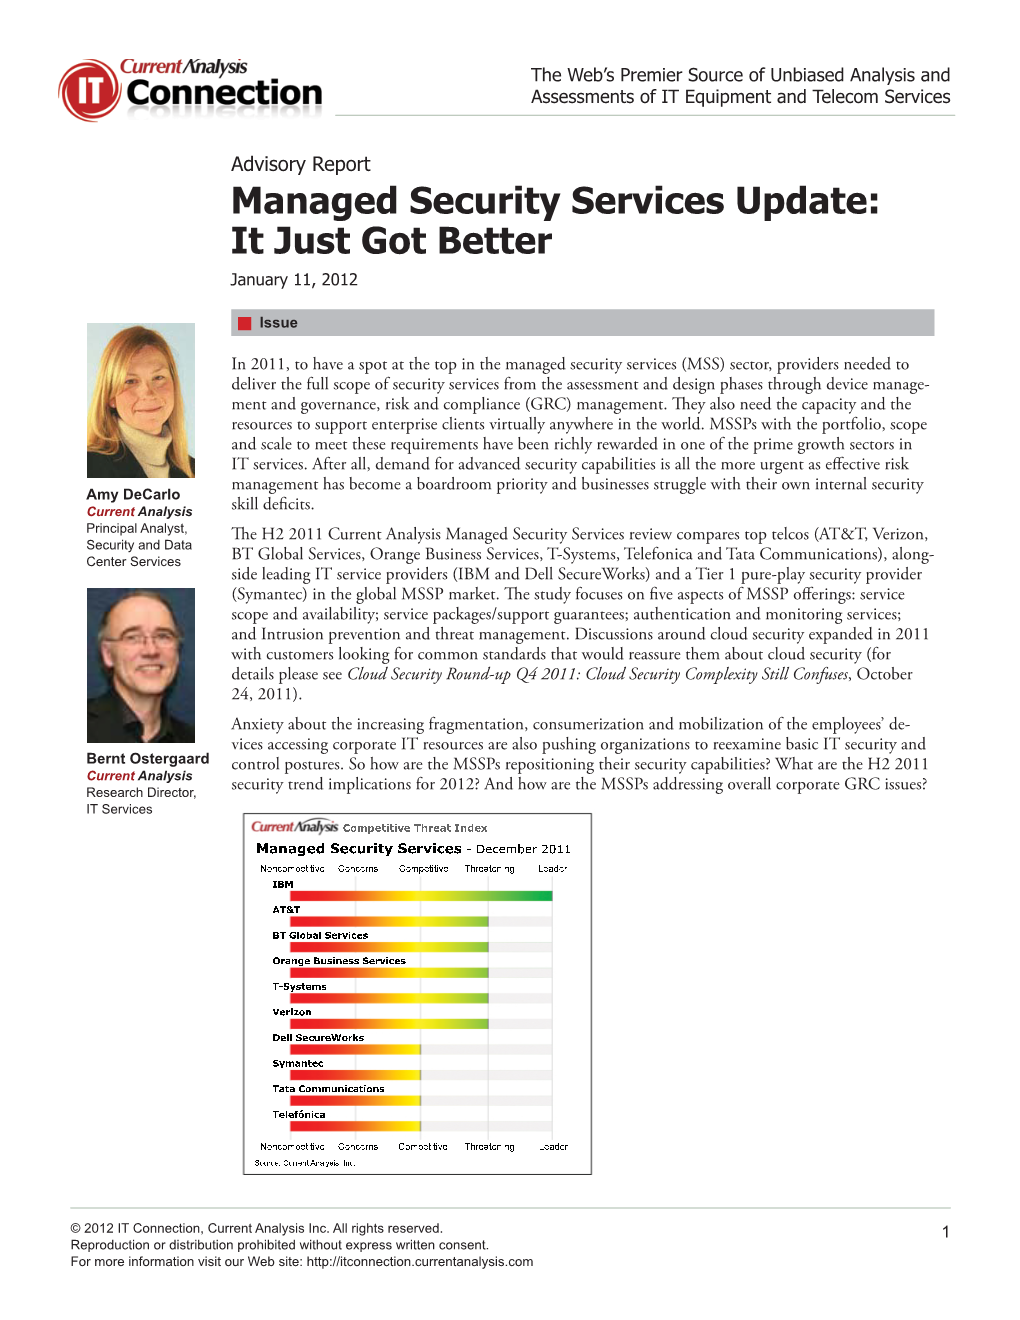 Managed Security Services Update: It Just Got Better January 11, 2012